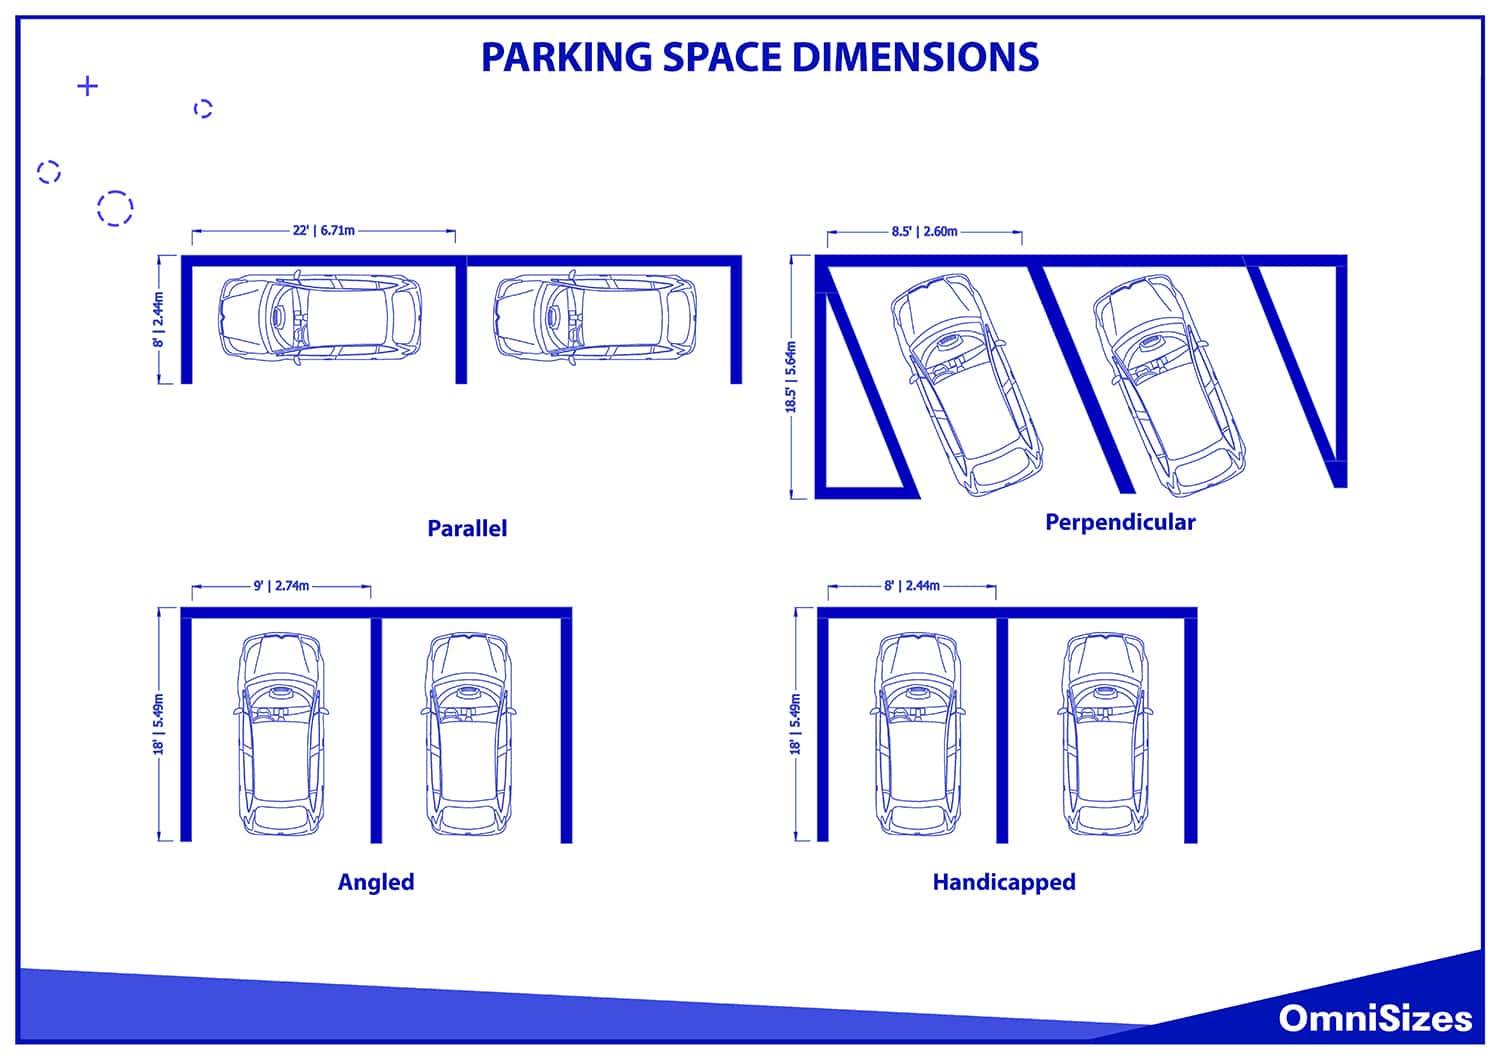 Parking space dimensions